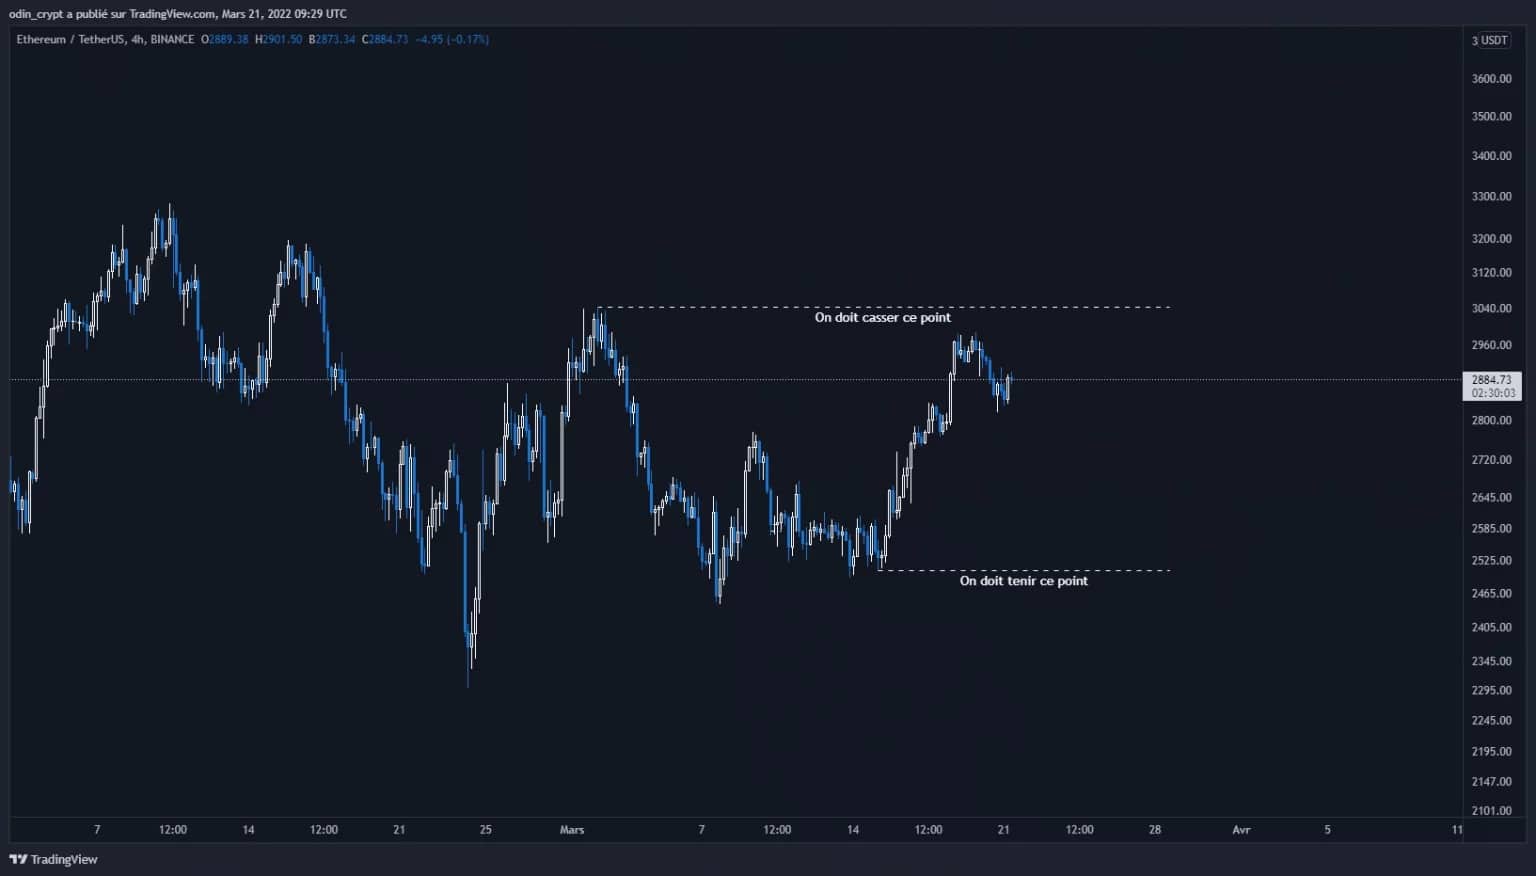 Ether (ETH) analyse in 4 uur